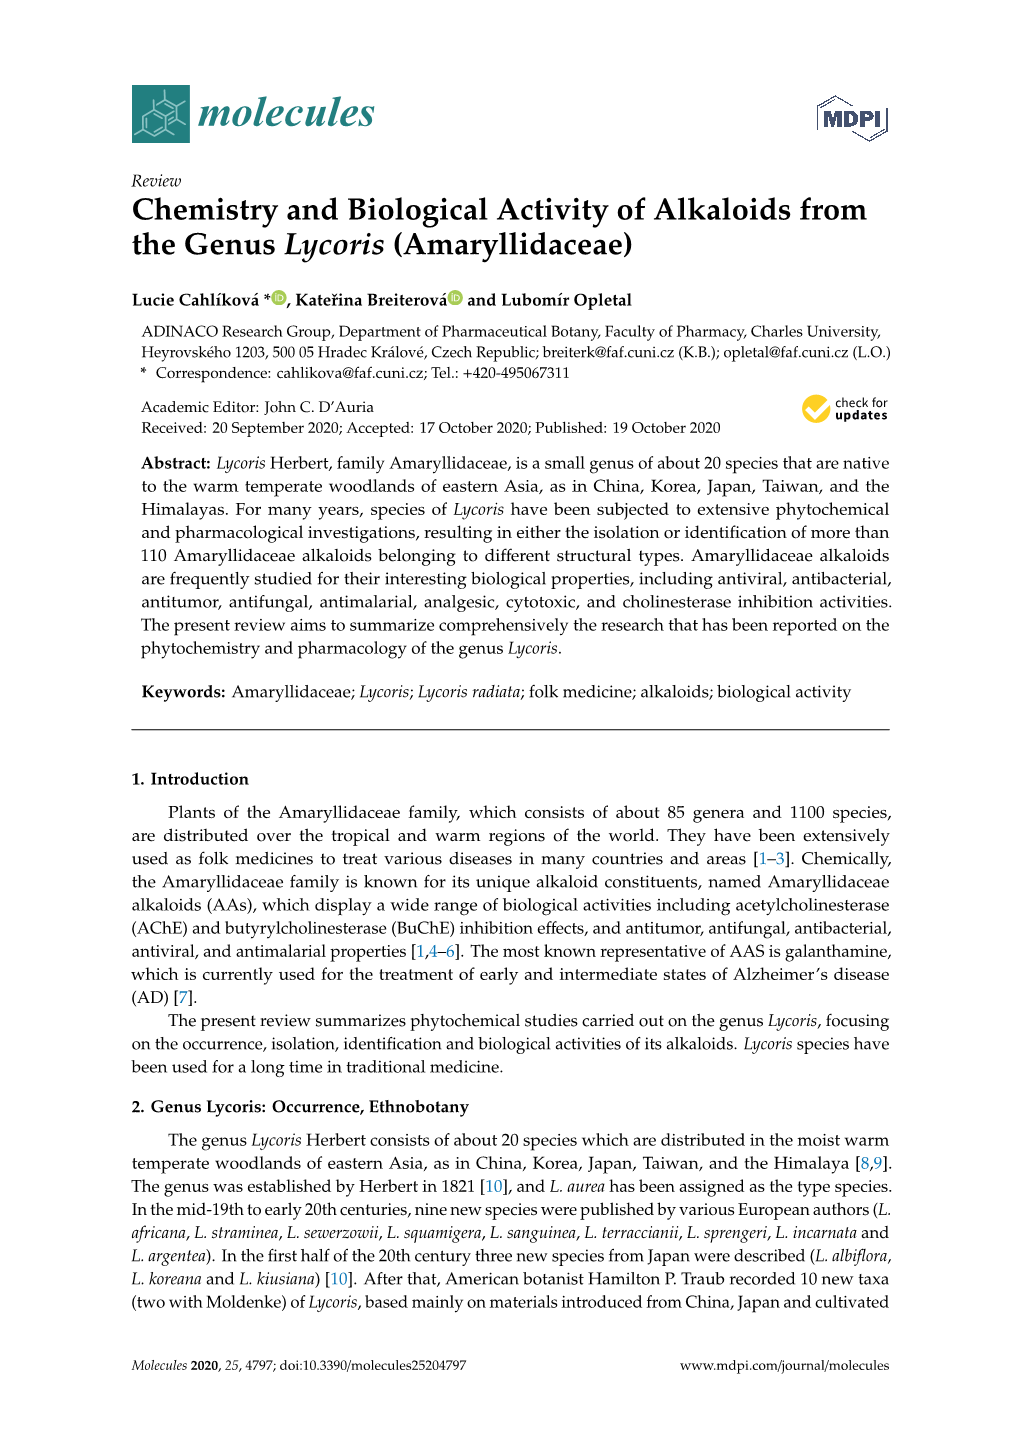 Chemistry and Biological Activity of Alkaloids from the Genus Lycoris (Amaryllidaceae)